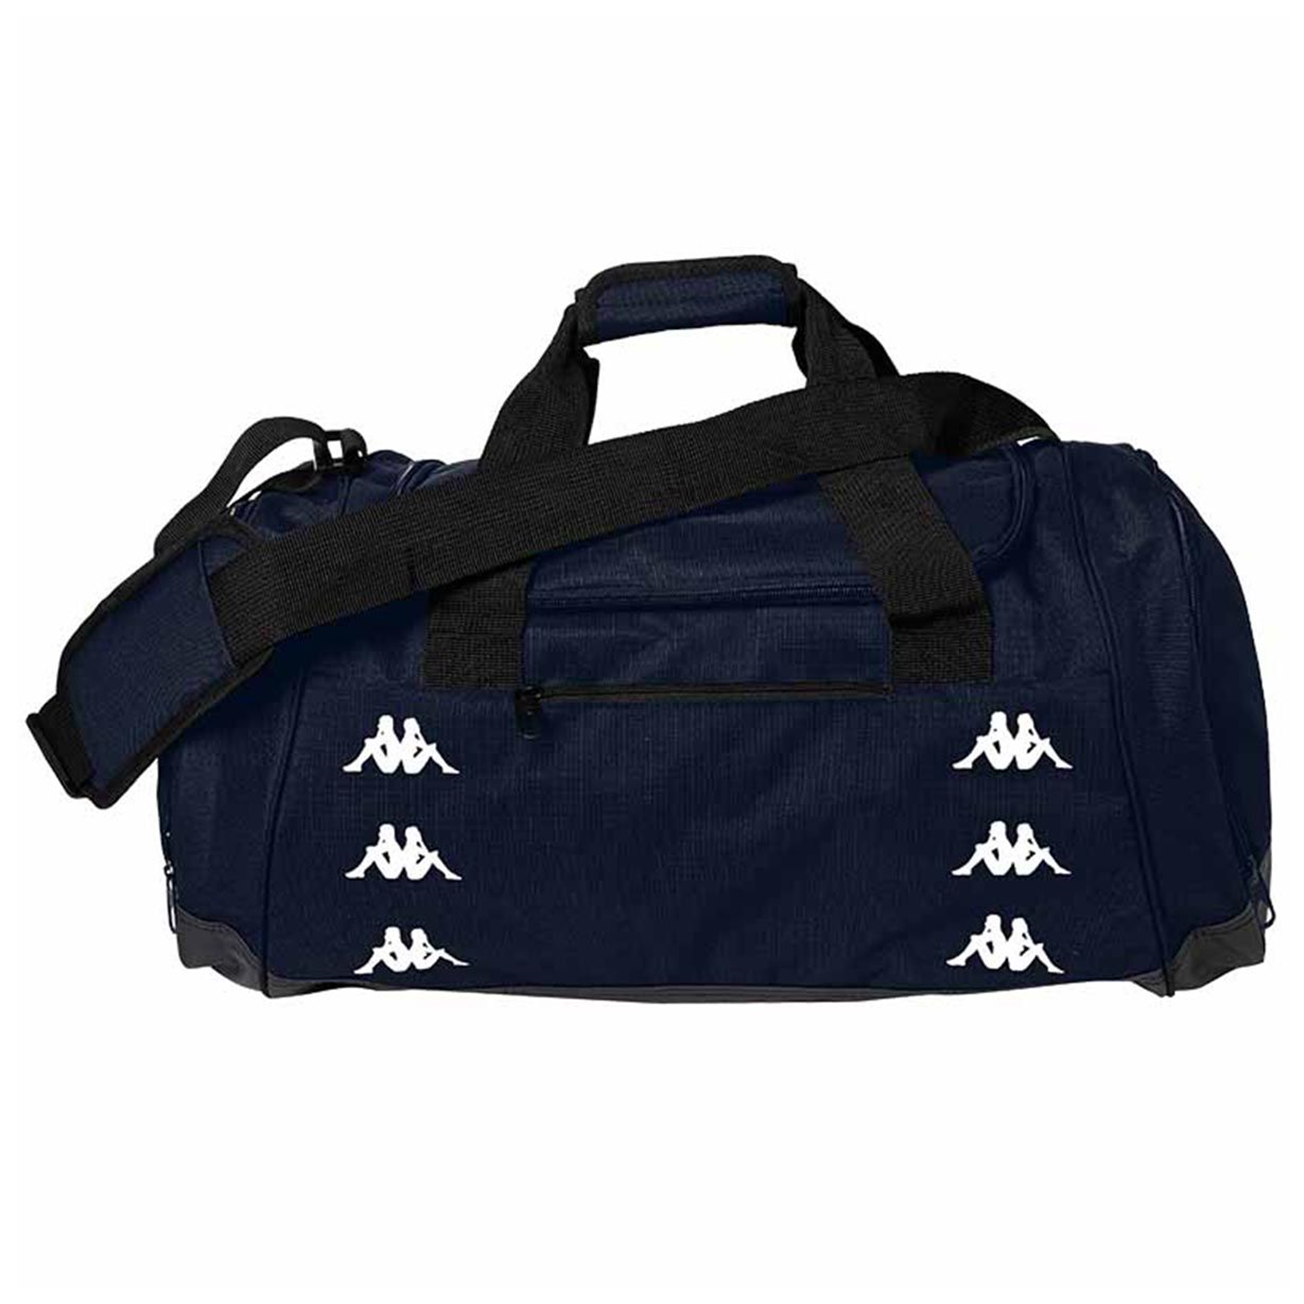 Avery FC - Players Holdall Bag [Grenno]